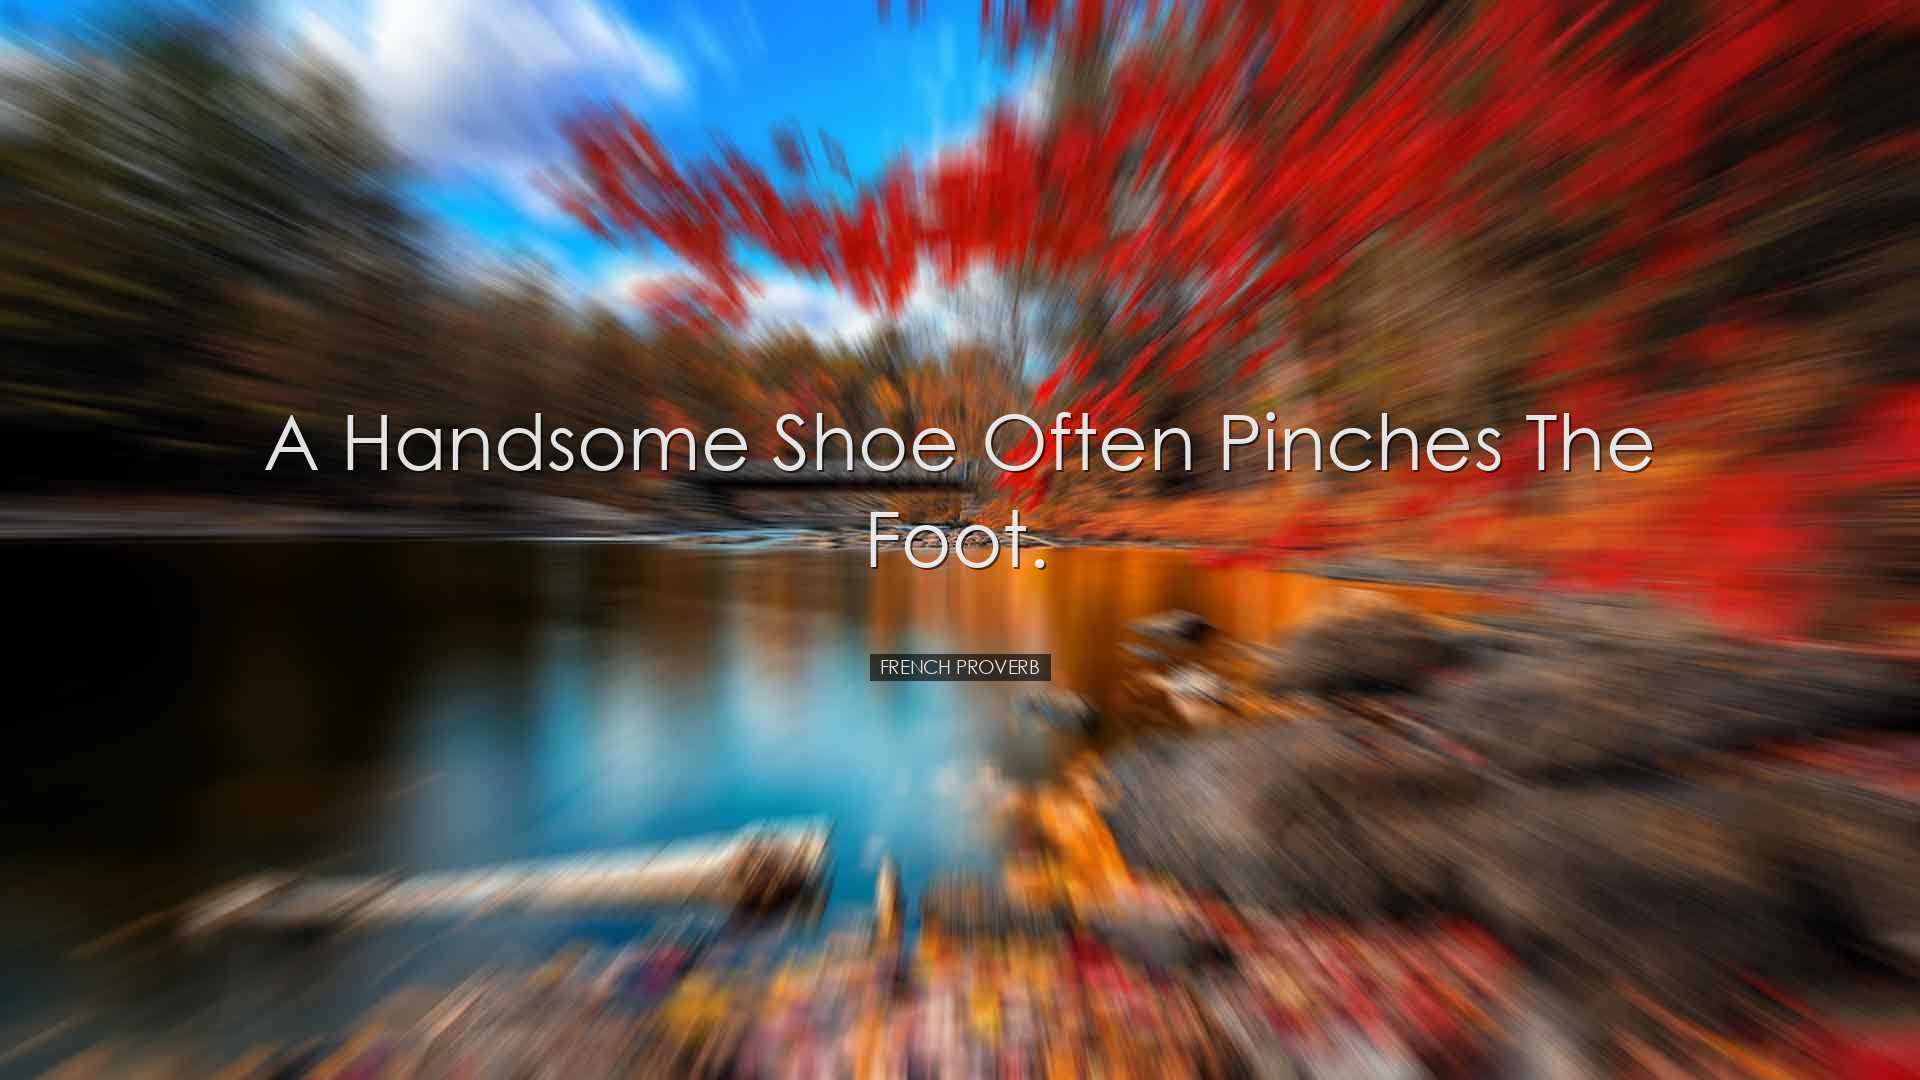 A handsome shoe often pinches the foot. - French proverb